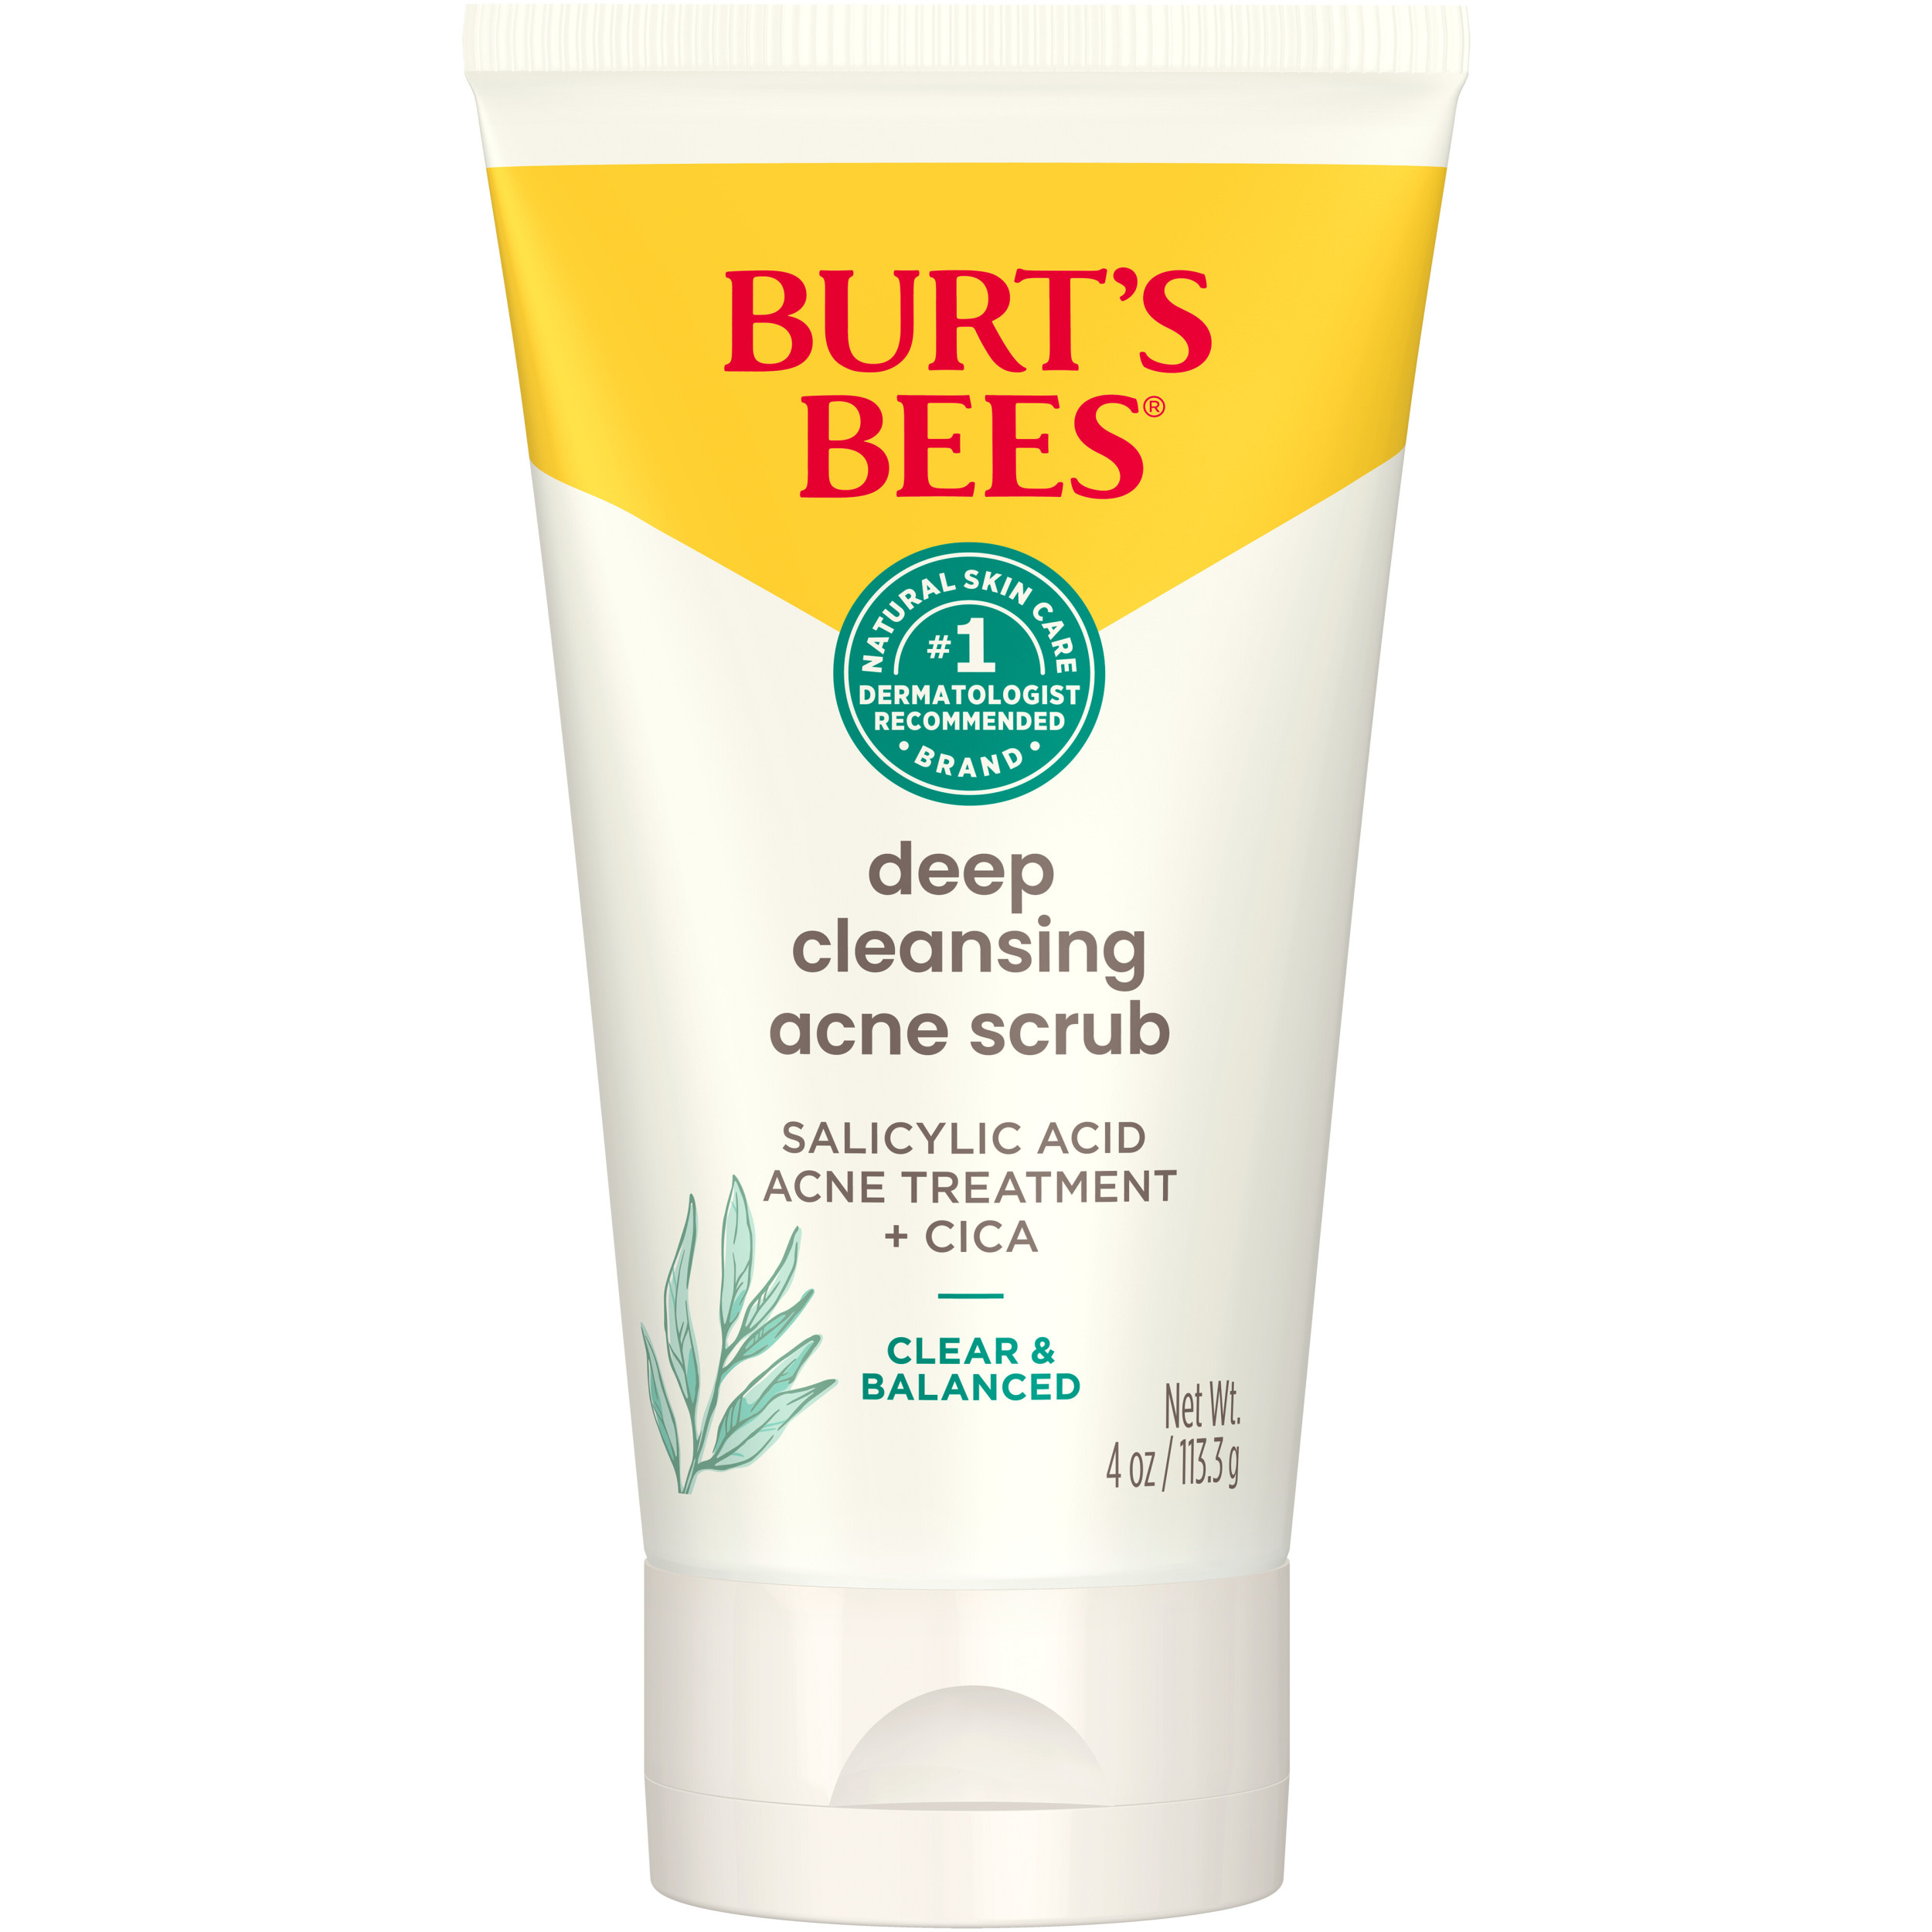 Burts Bees Clear and Balanced Deep Cleansing Acne Face Scrub, 4 Oz - image 1 of 10